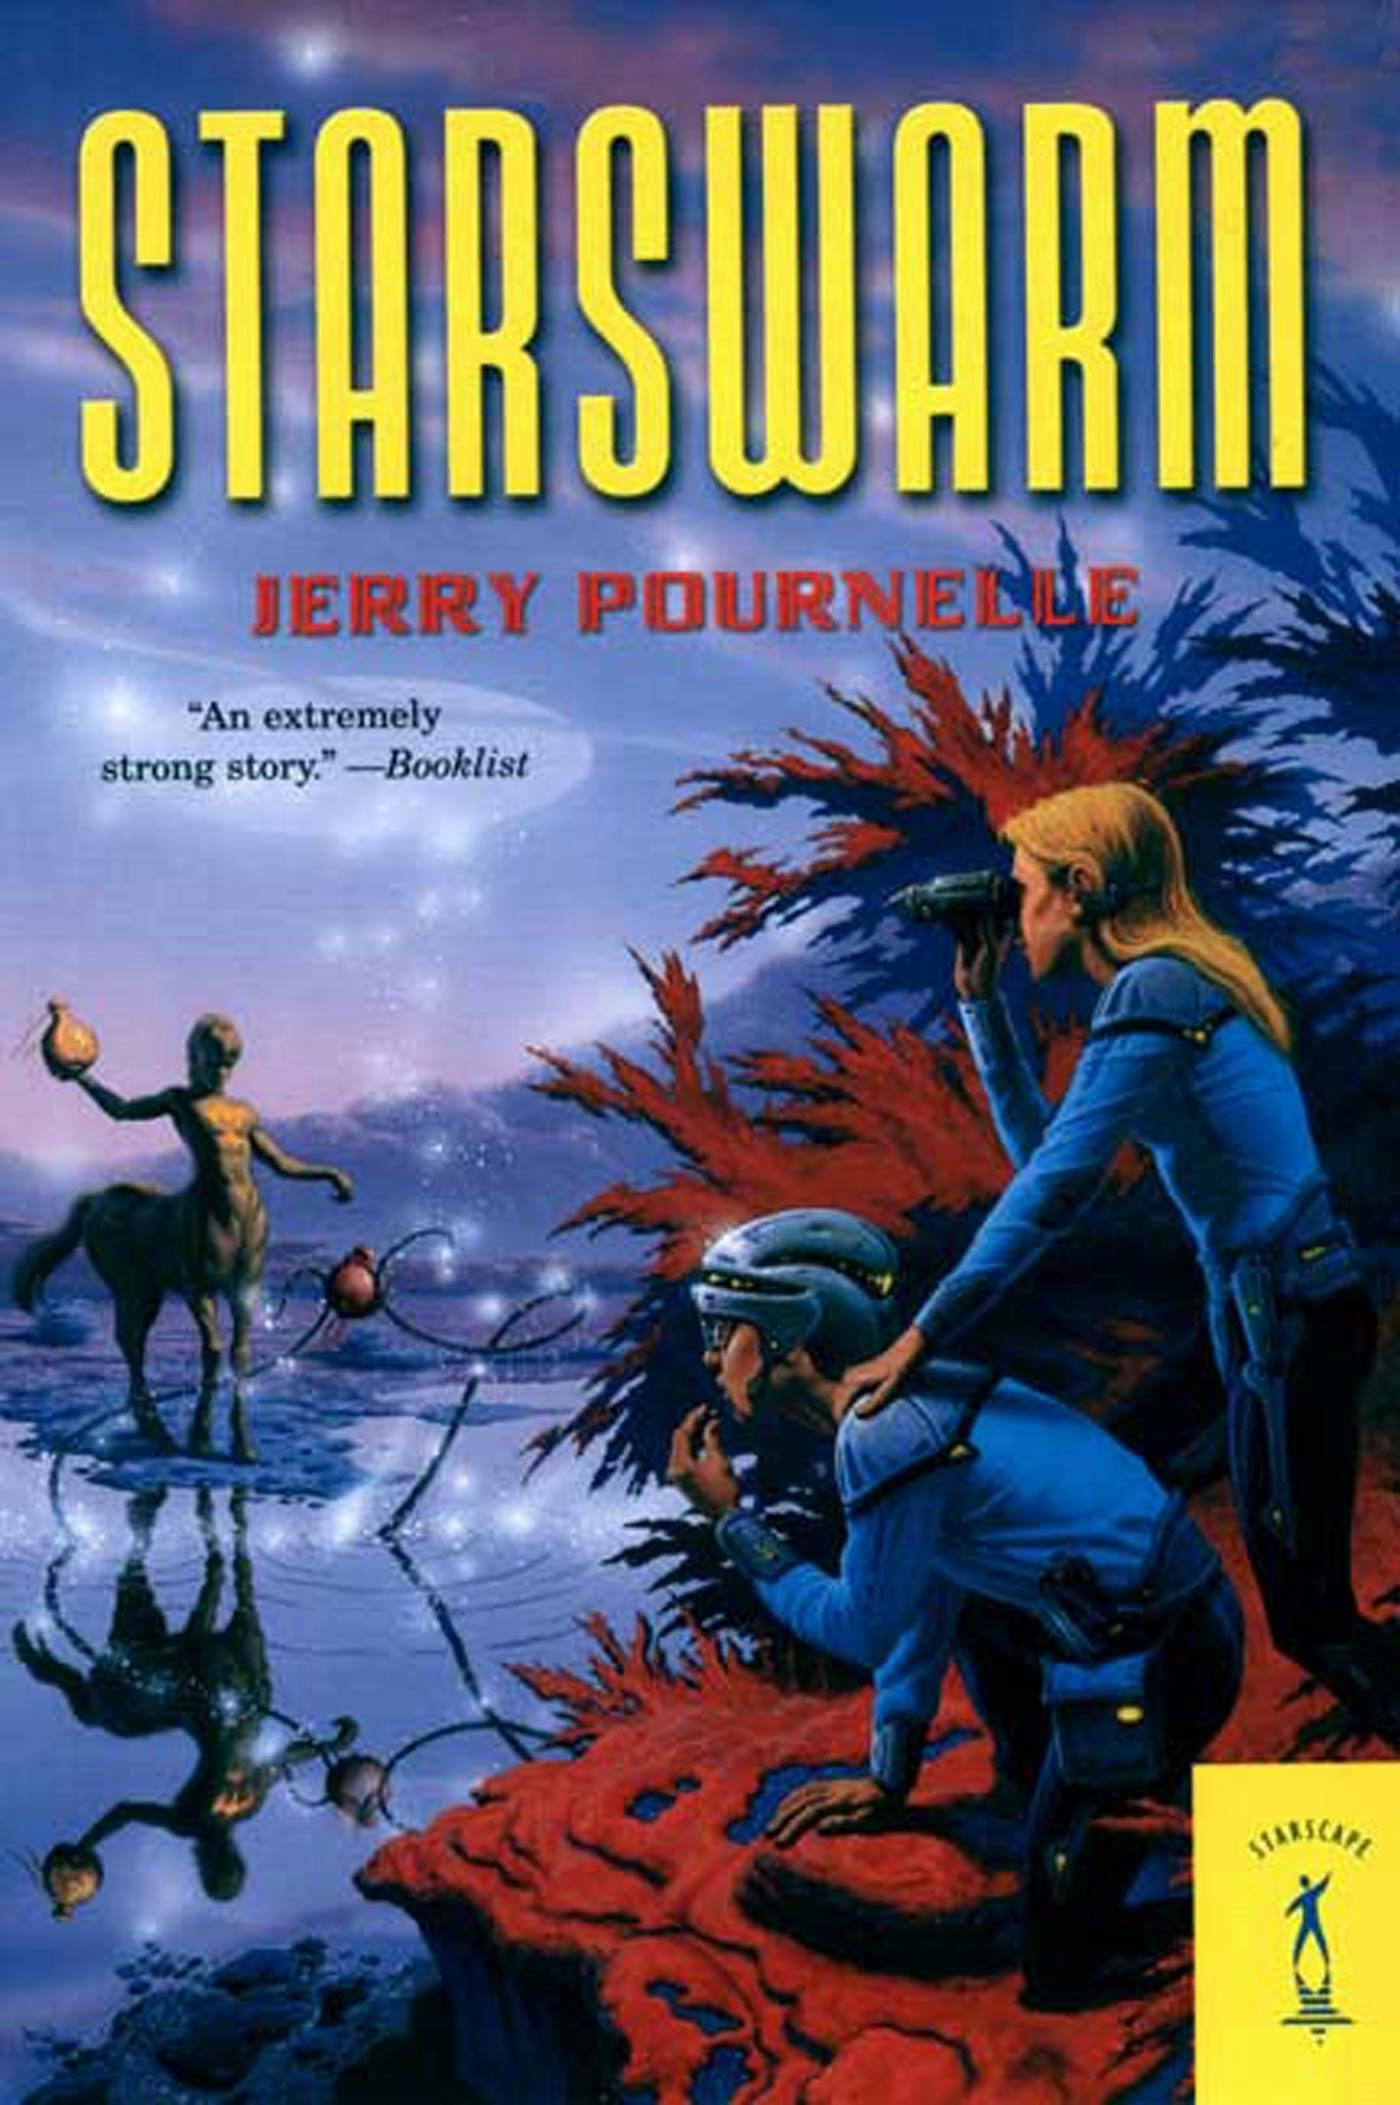 Cover for the book titled as: Starswarm